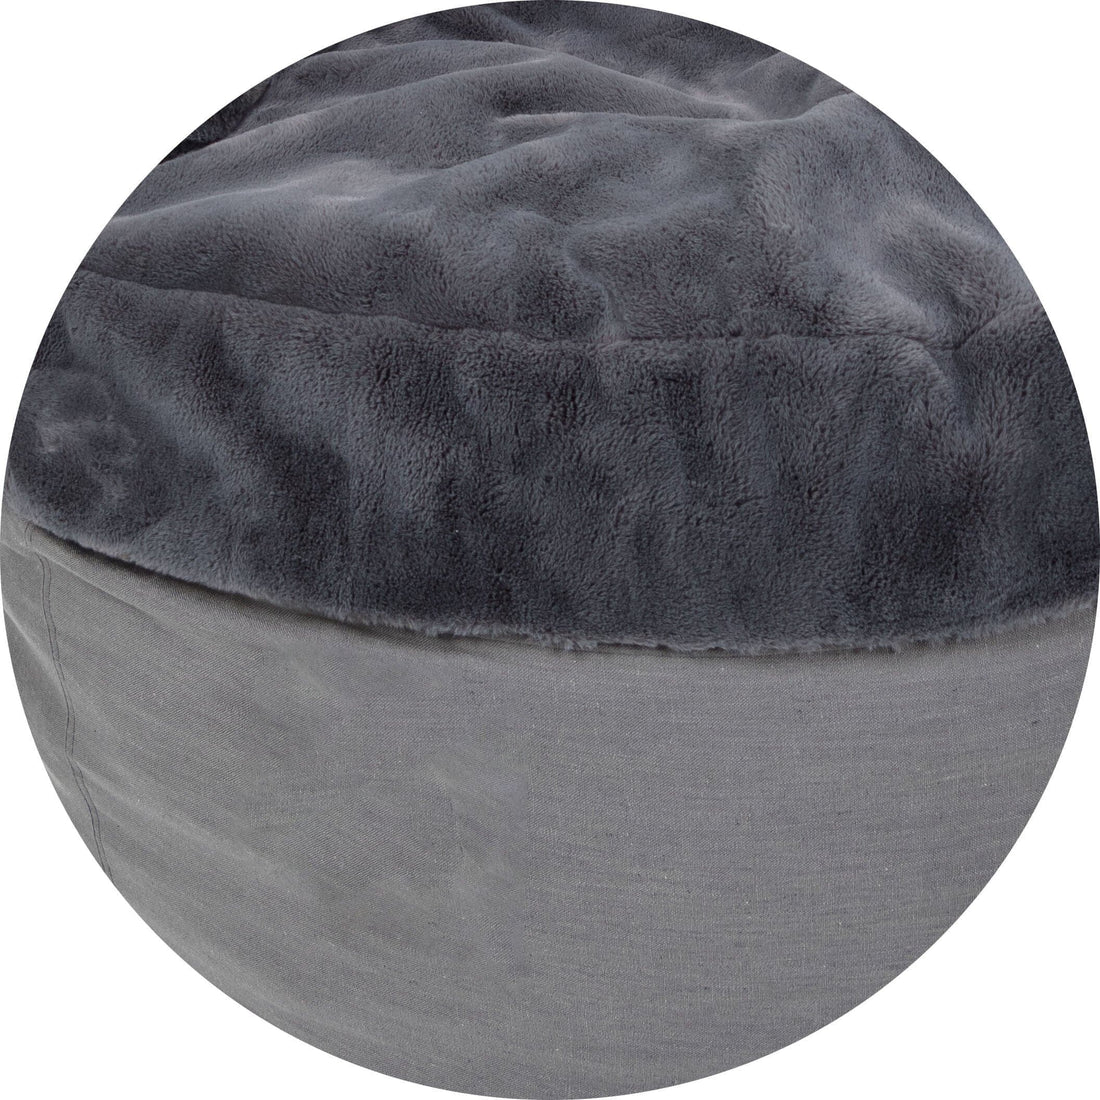 Footstool/Pouf Cover - NEST Bunny Fur